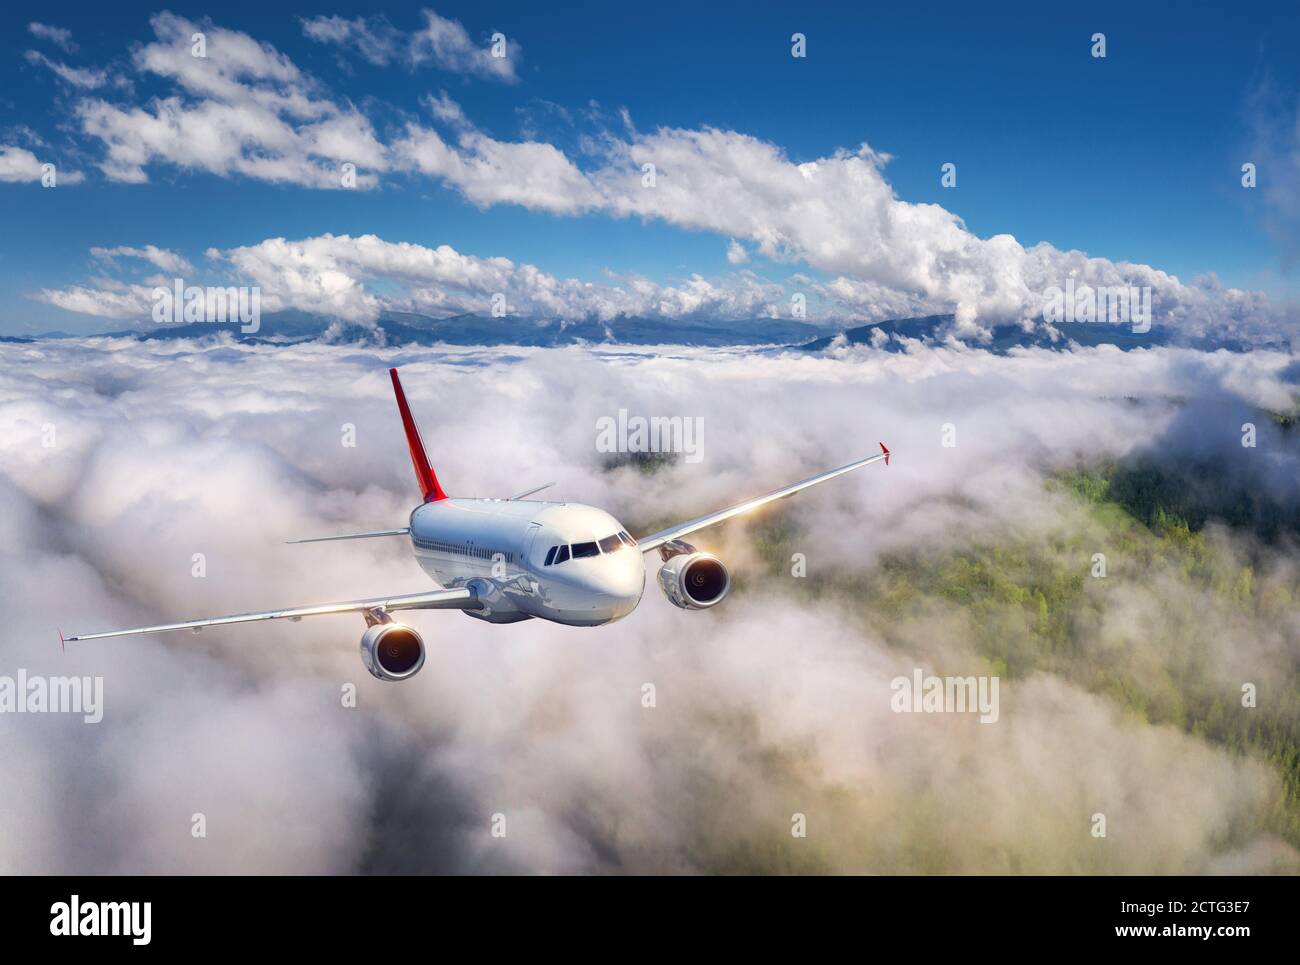 Airplane is flying in low clouds over mountains at sunset Stock Photo